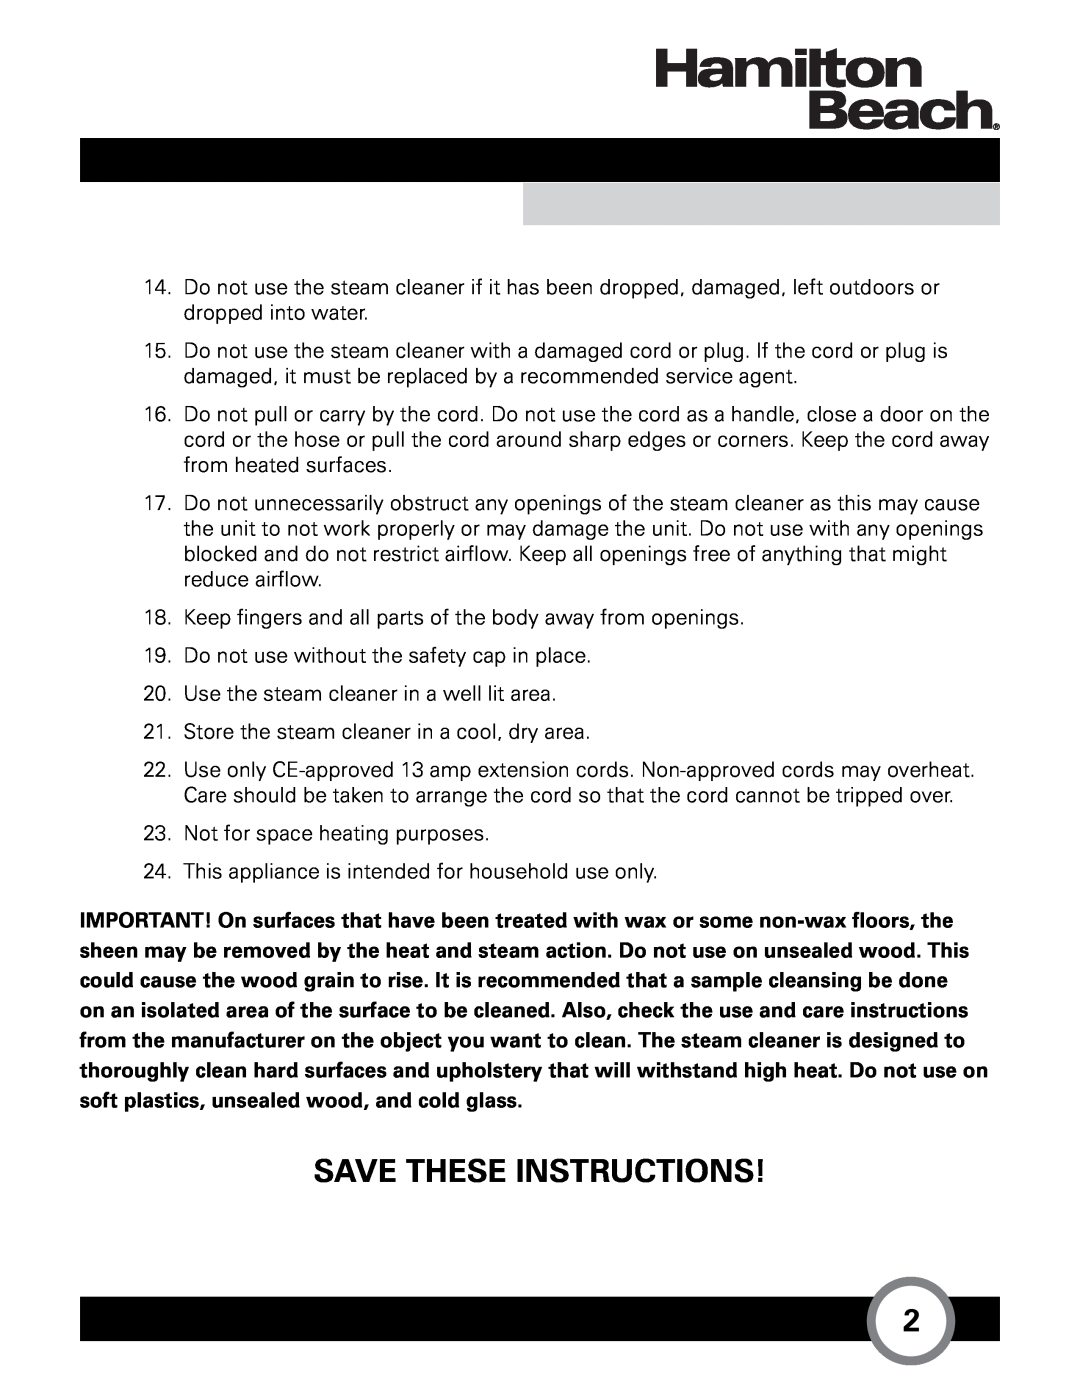 Hamilton Beach HB-165 owner manual Save These Instructions!  